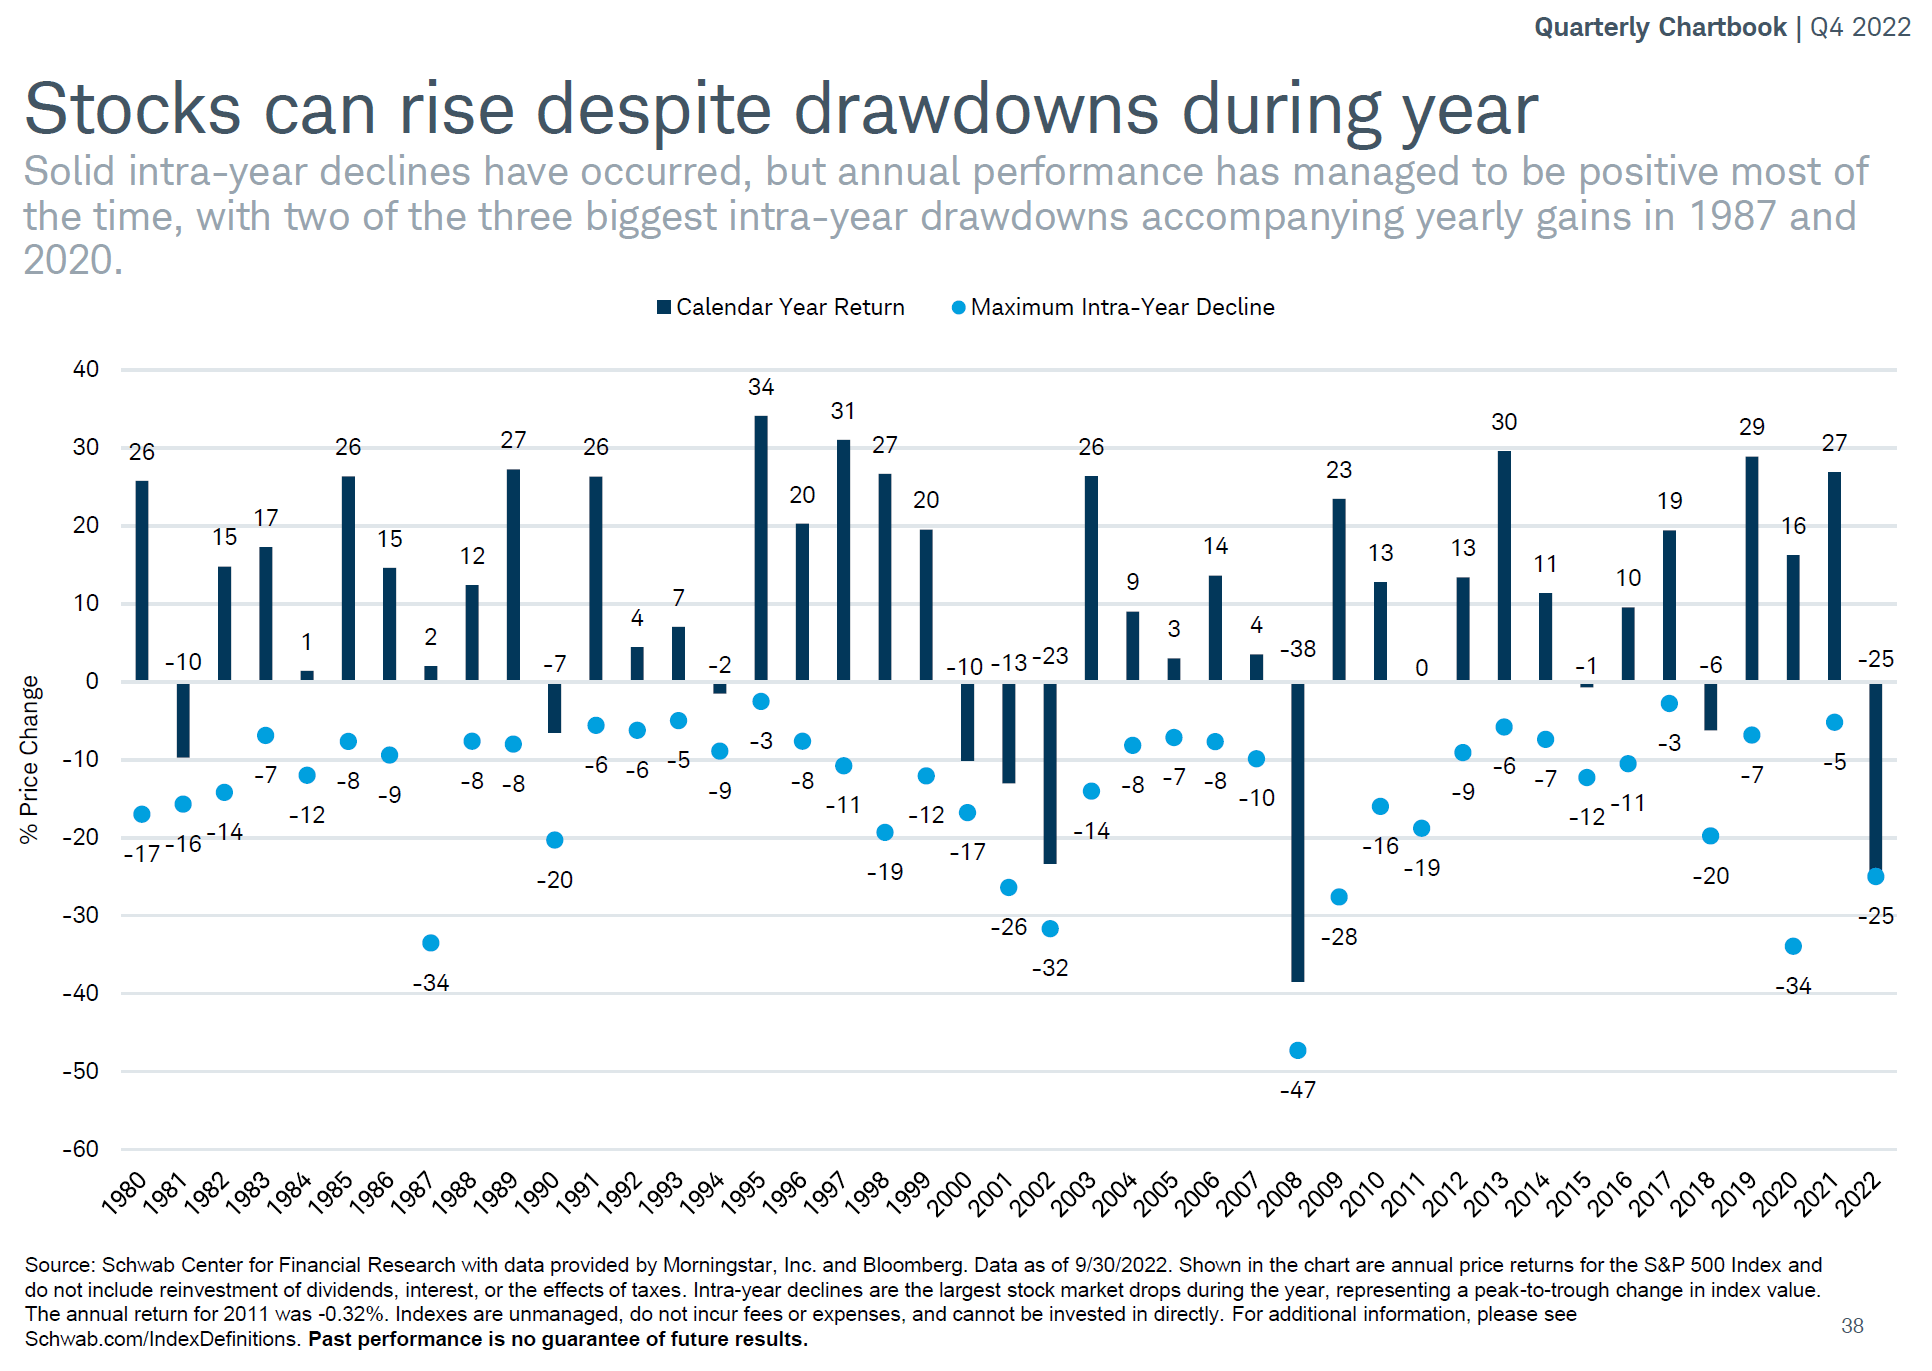 Stocks can rise despite drawdowns during the year